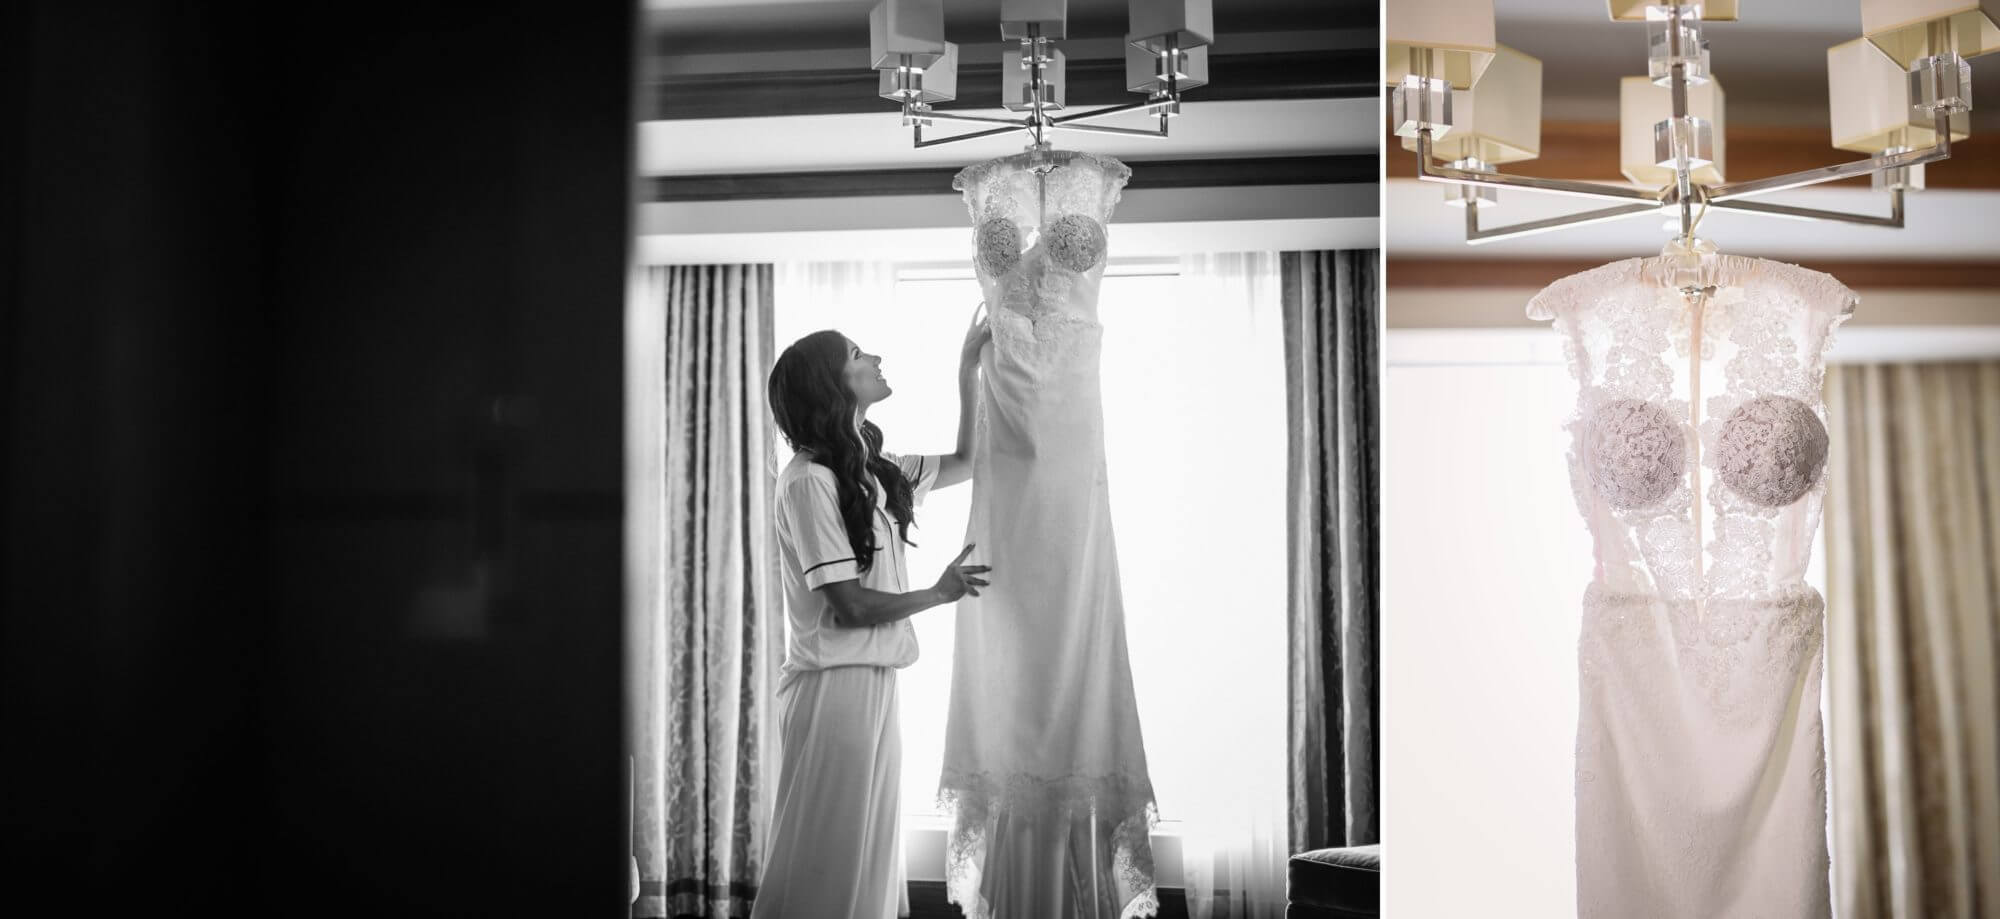 The bride's dress elegantly hangs from the chandelier at The Ritz-Carleton, Toronto